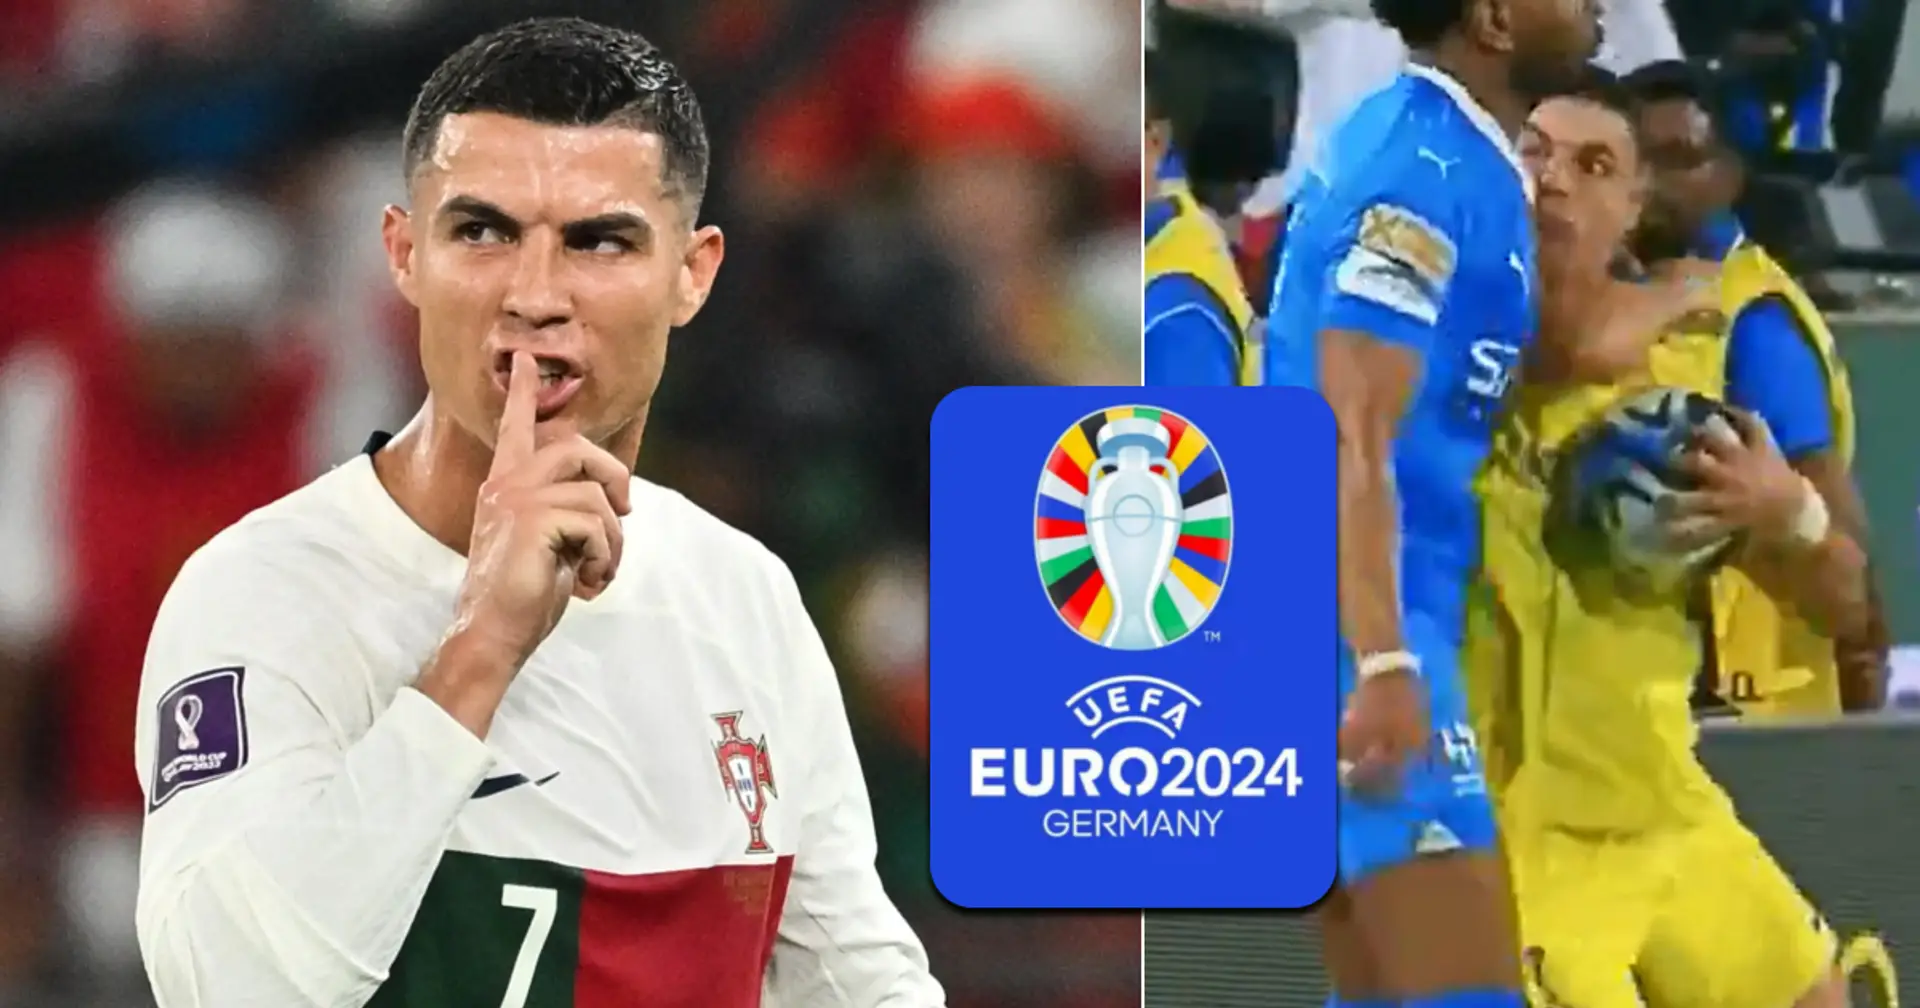 'Toxic, toxic man': Fan feels sorry for Portugal ahead of Euro 2024 after Cristiano Ronaldo's latest misconduct